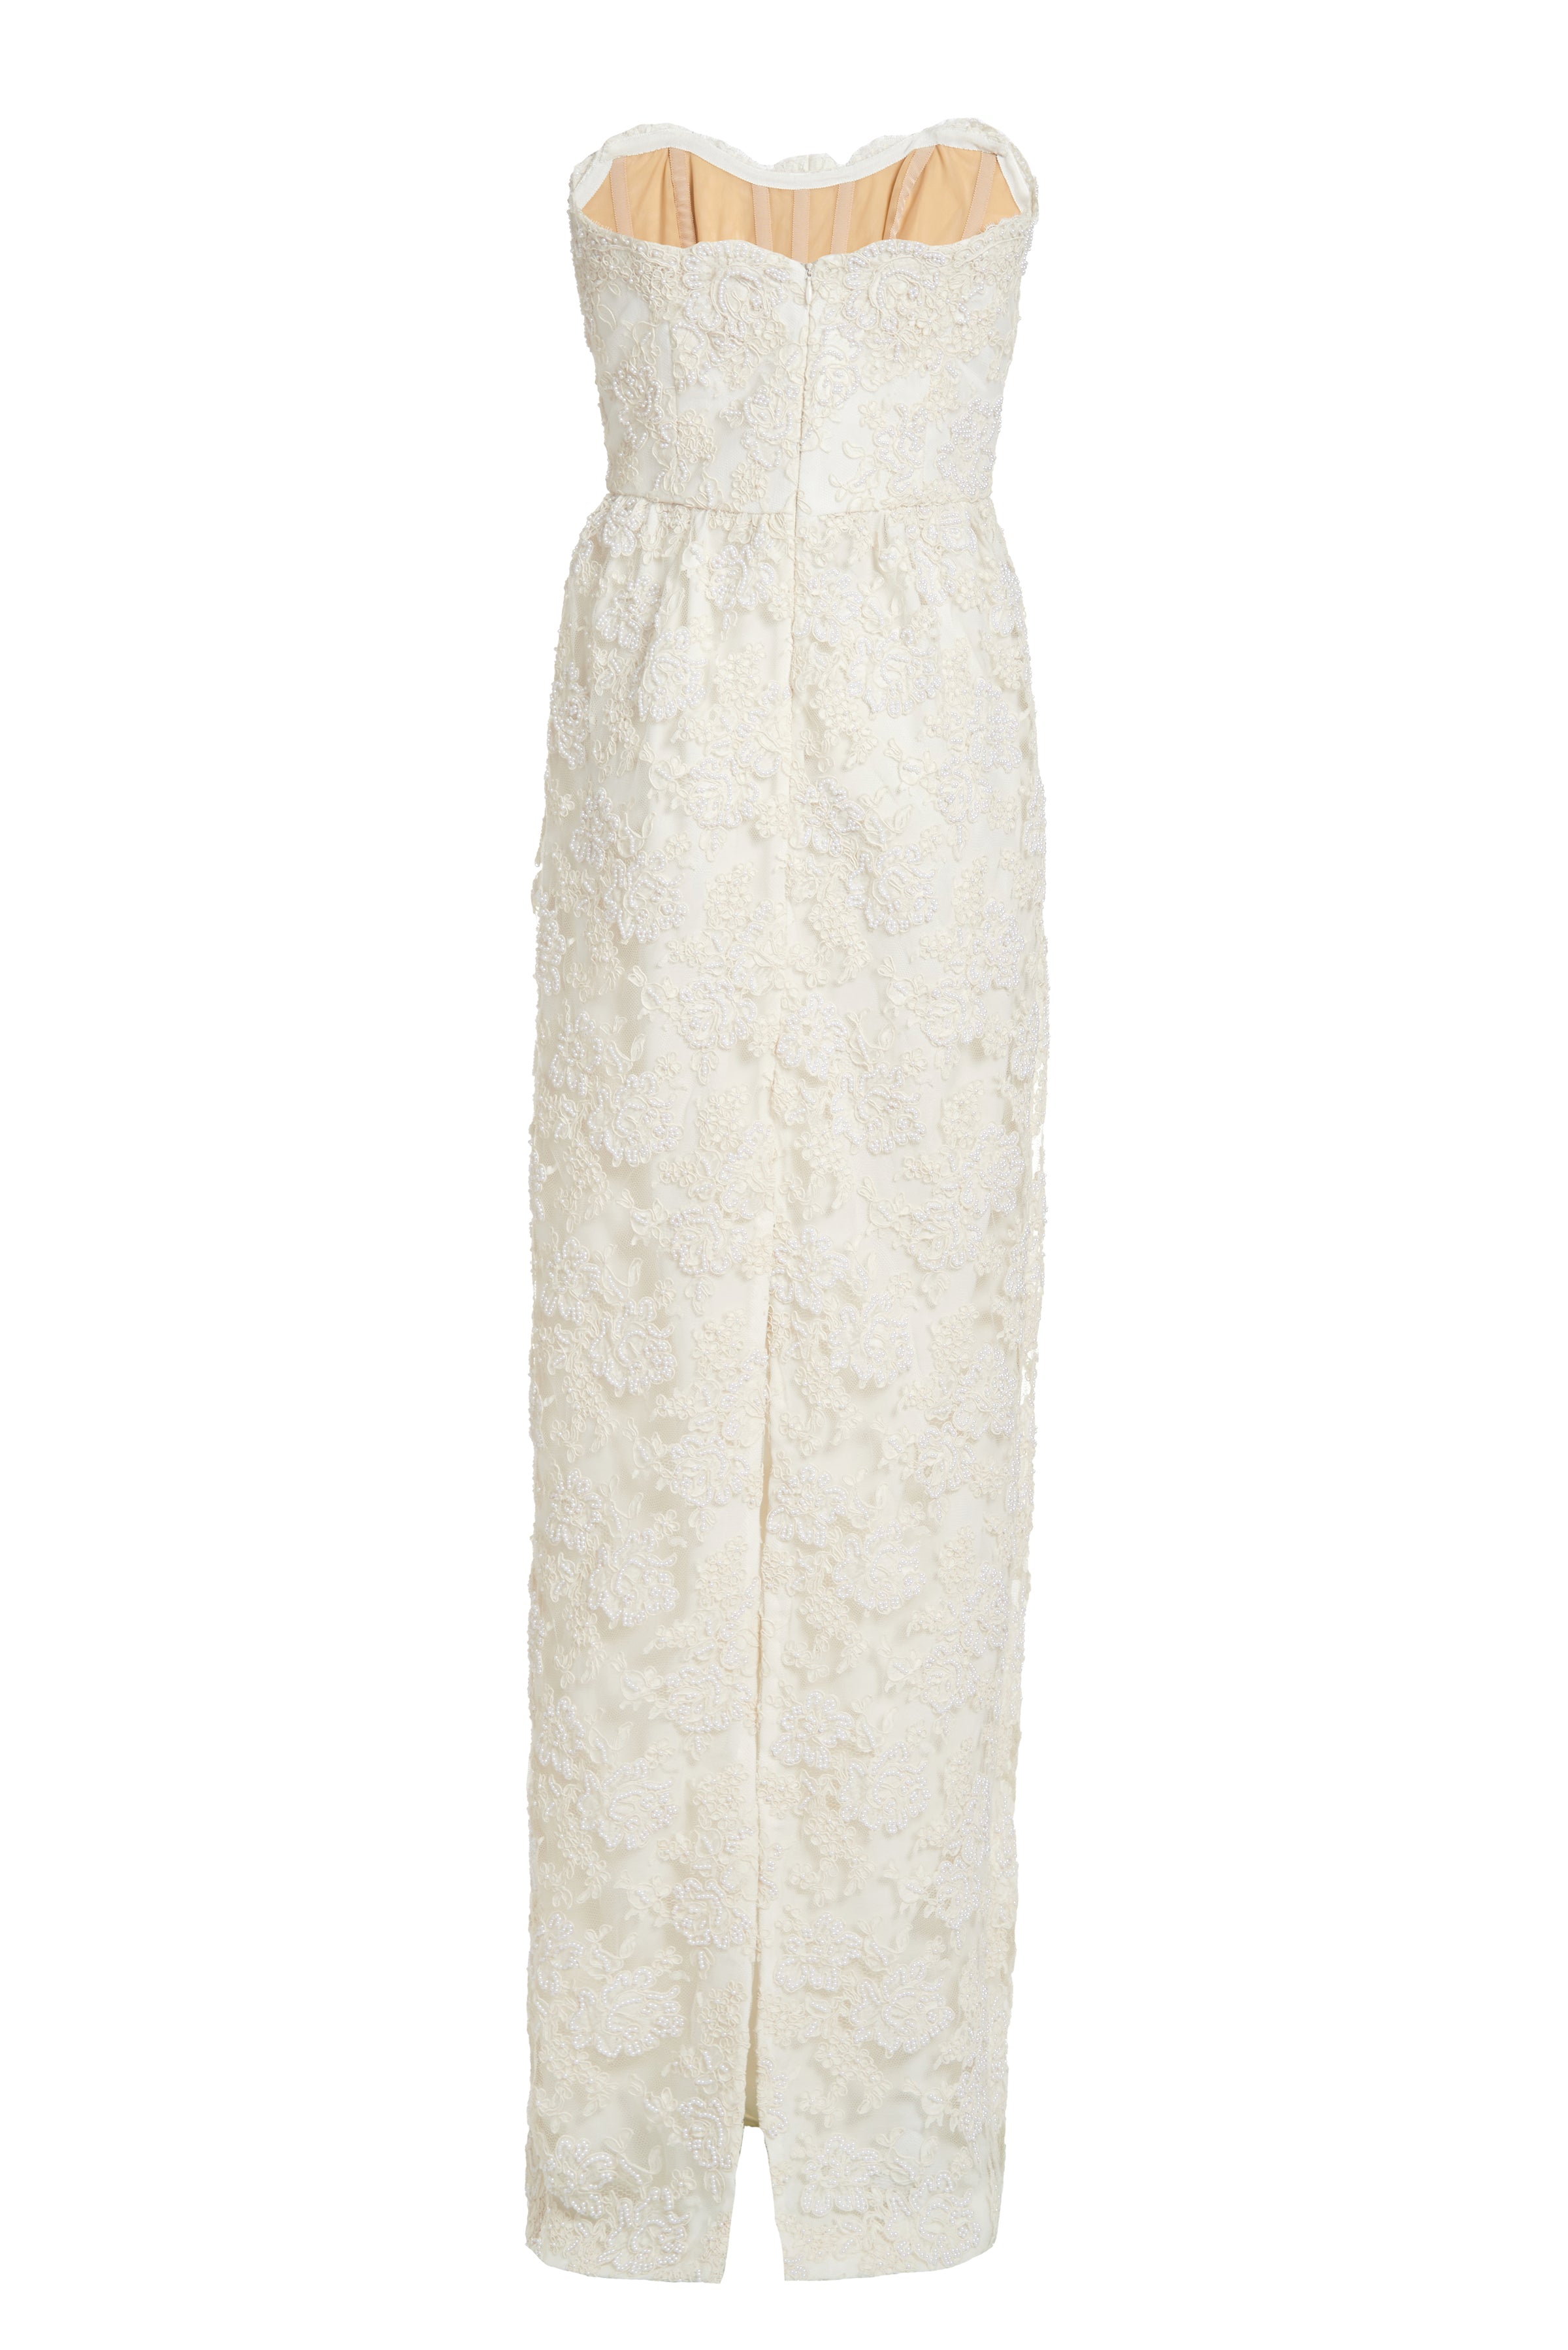 Evora Pearl Beaded White Lace Gown with Large Detachable Bow